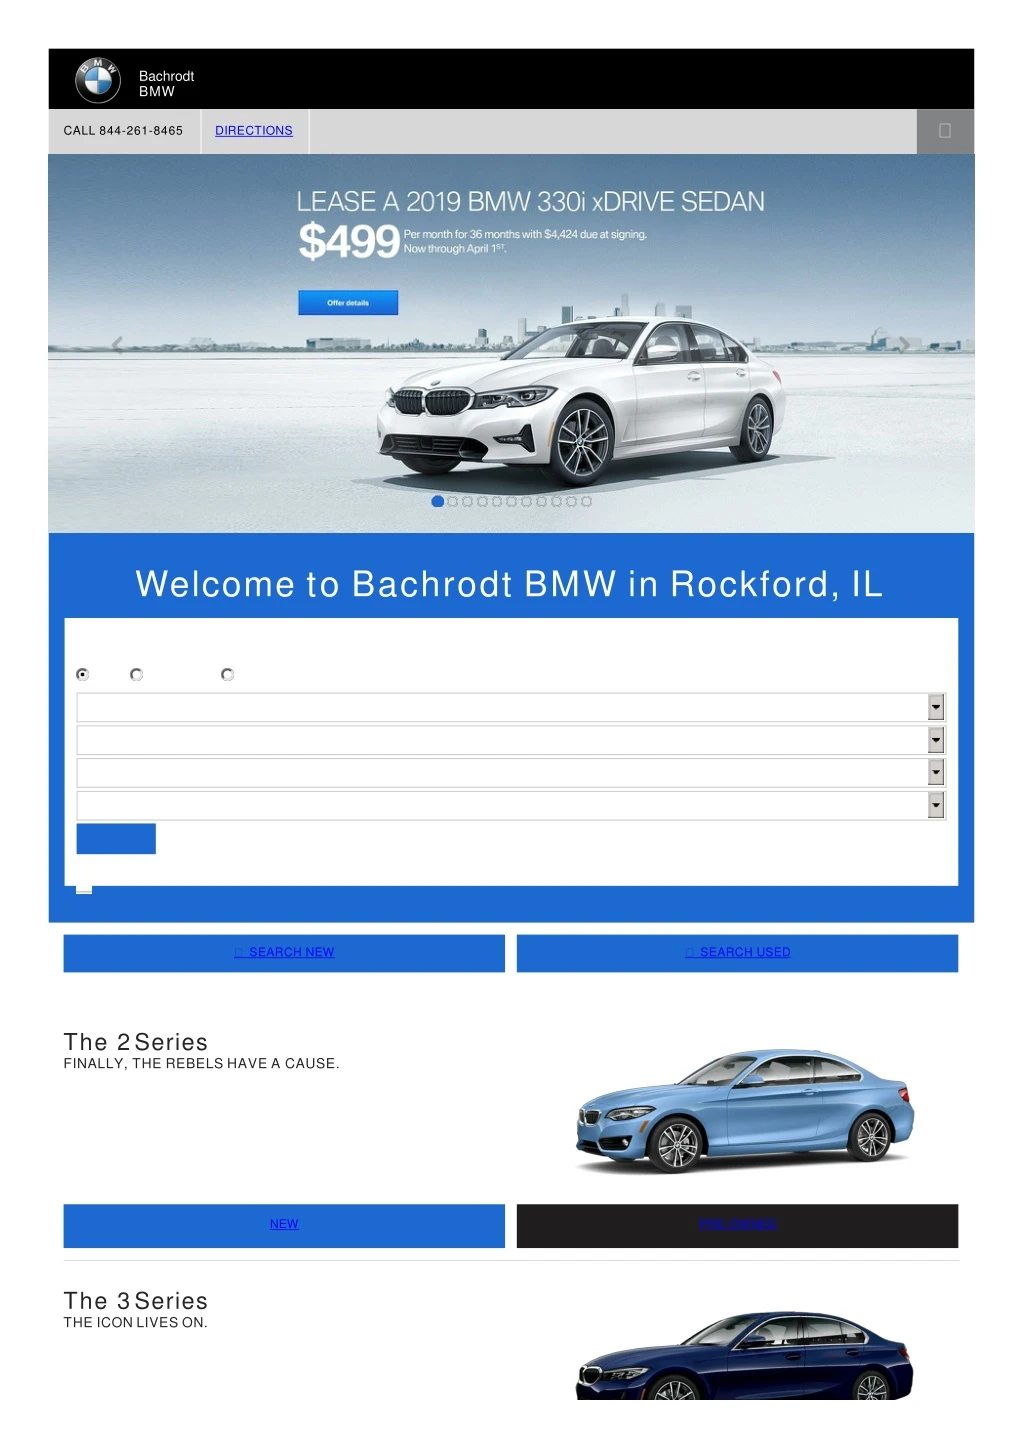 welcome to bachrodt bmw in rockford il inventory